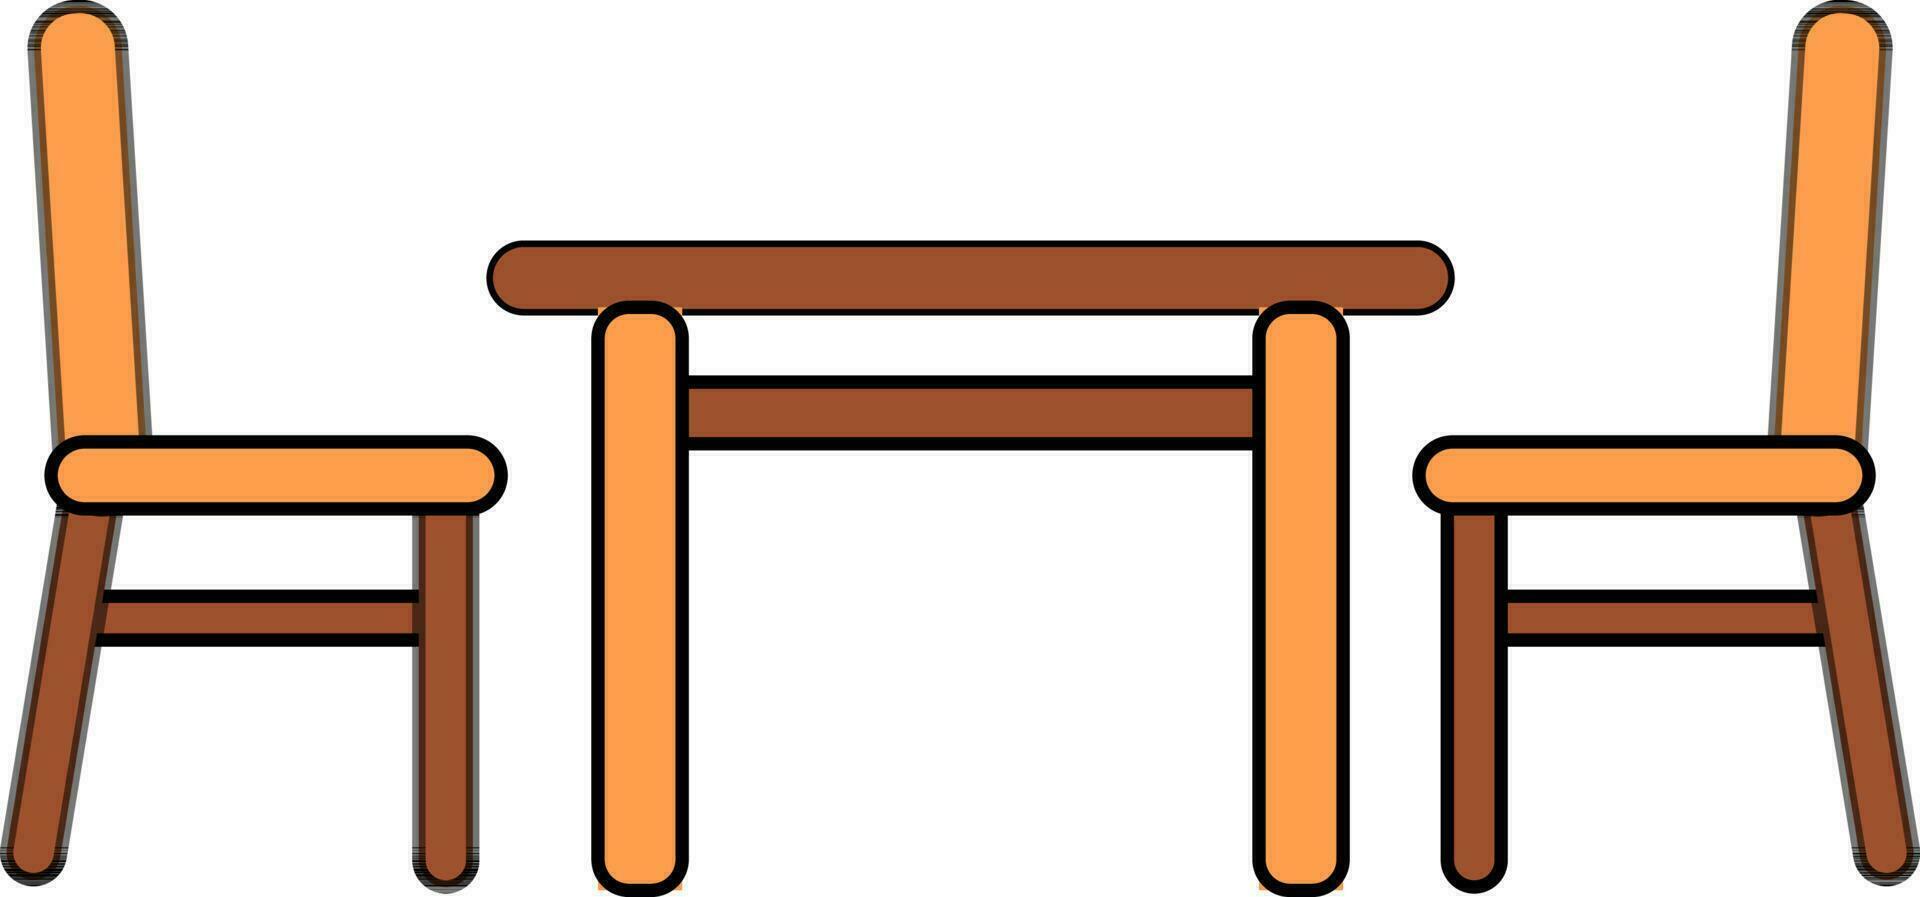 Dining table icon with chair in isolated. vector